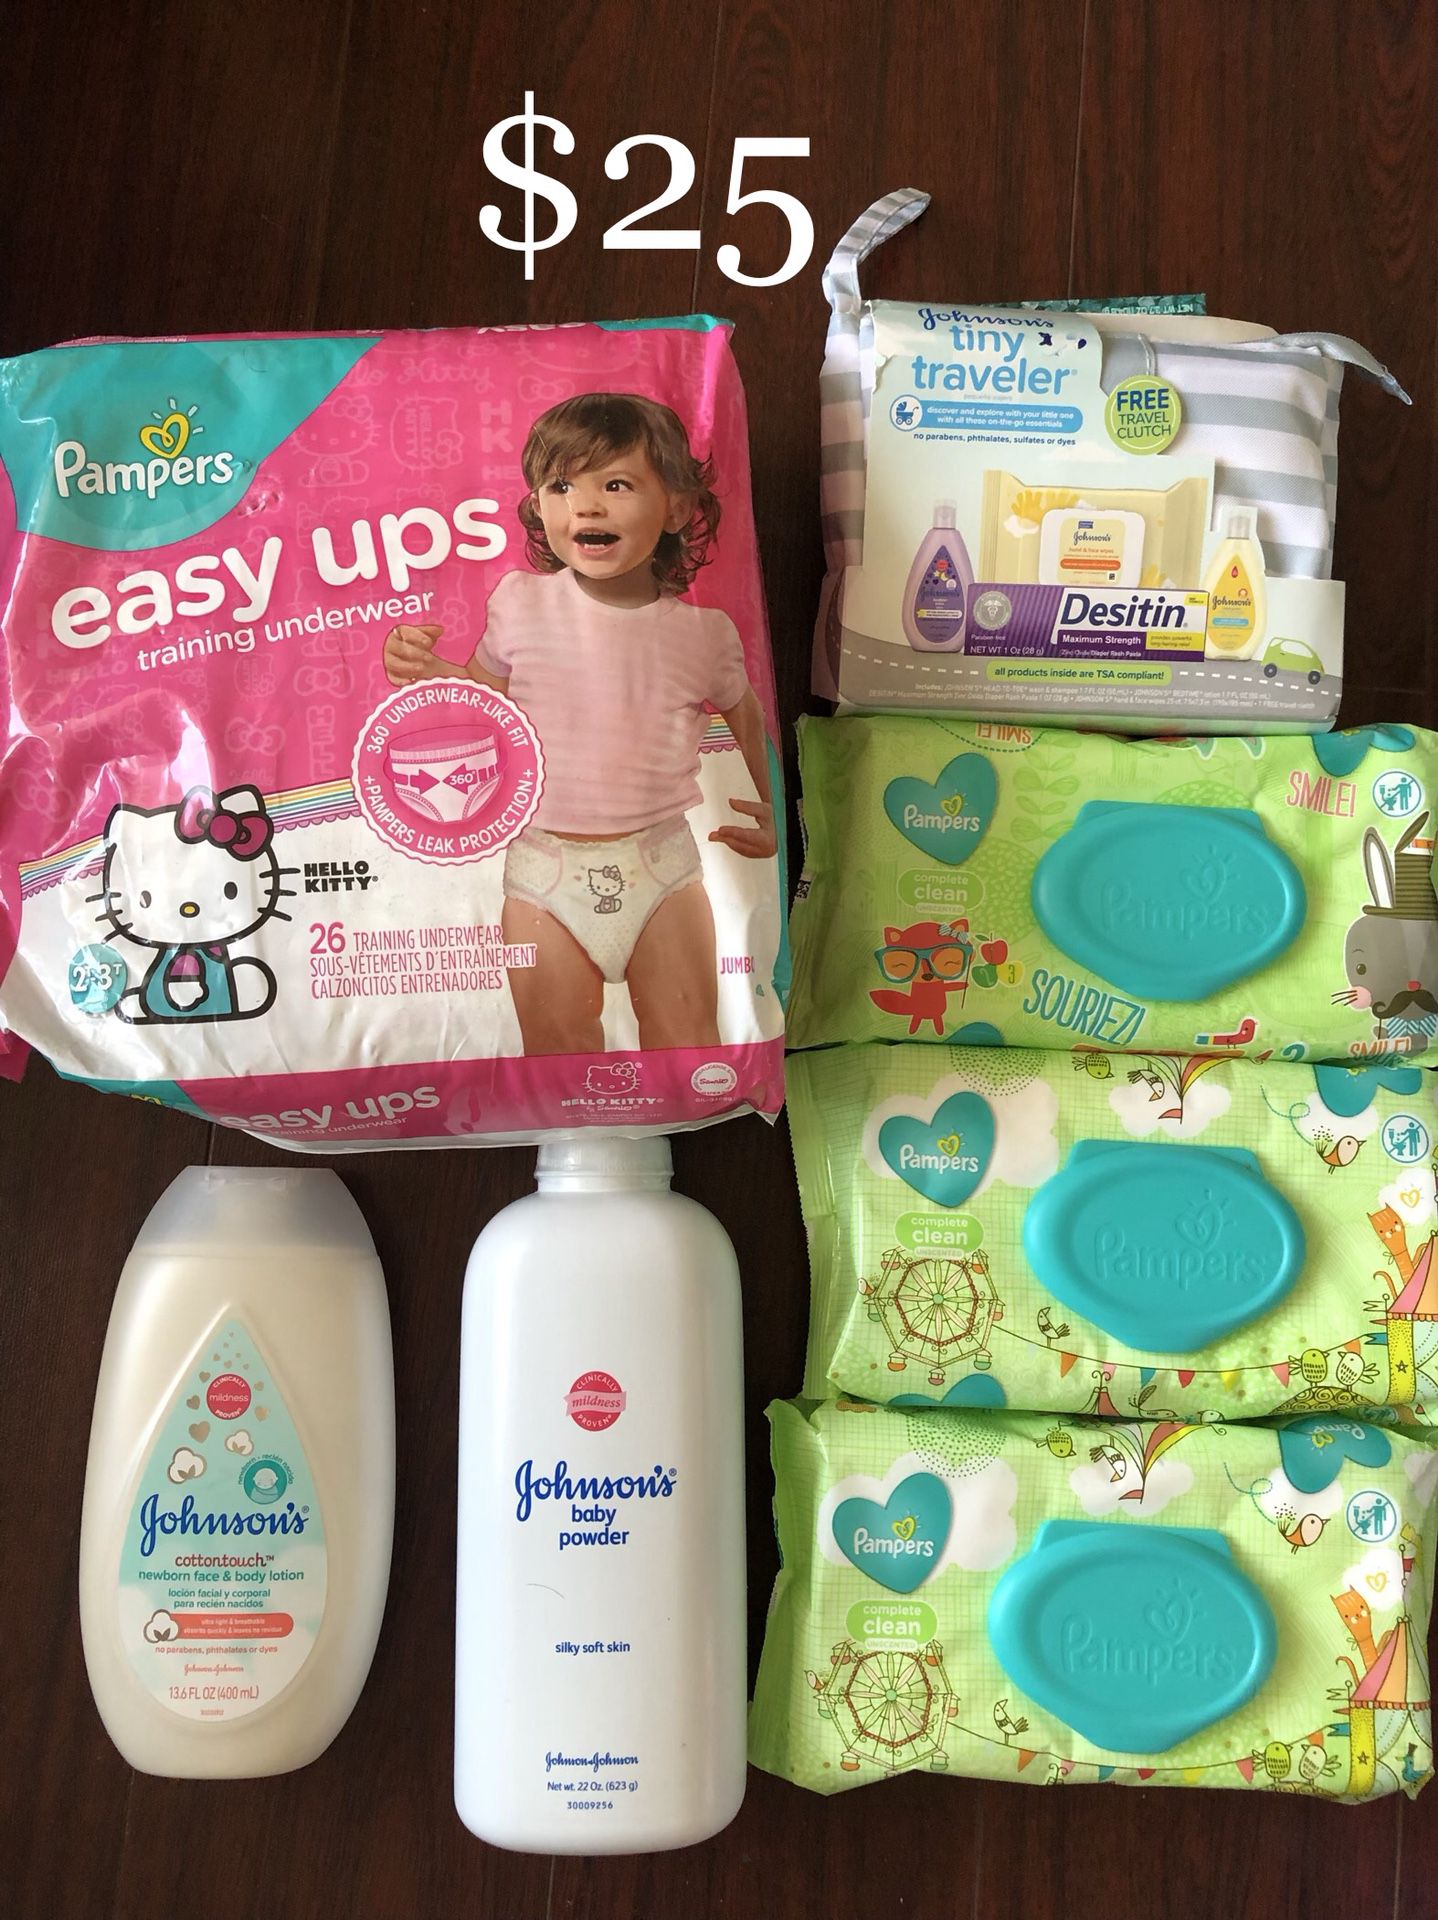 1 Pampers Diapers (2T-3T), 6 Johnson’s Baby: 3 Wet Wipes, 1 Tiny Traveler Essentials Bag (see pictures), 1 Baby Powder (large, 22 oz), 1 Cotton Touch